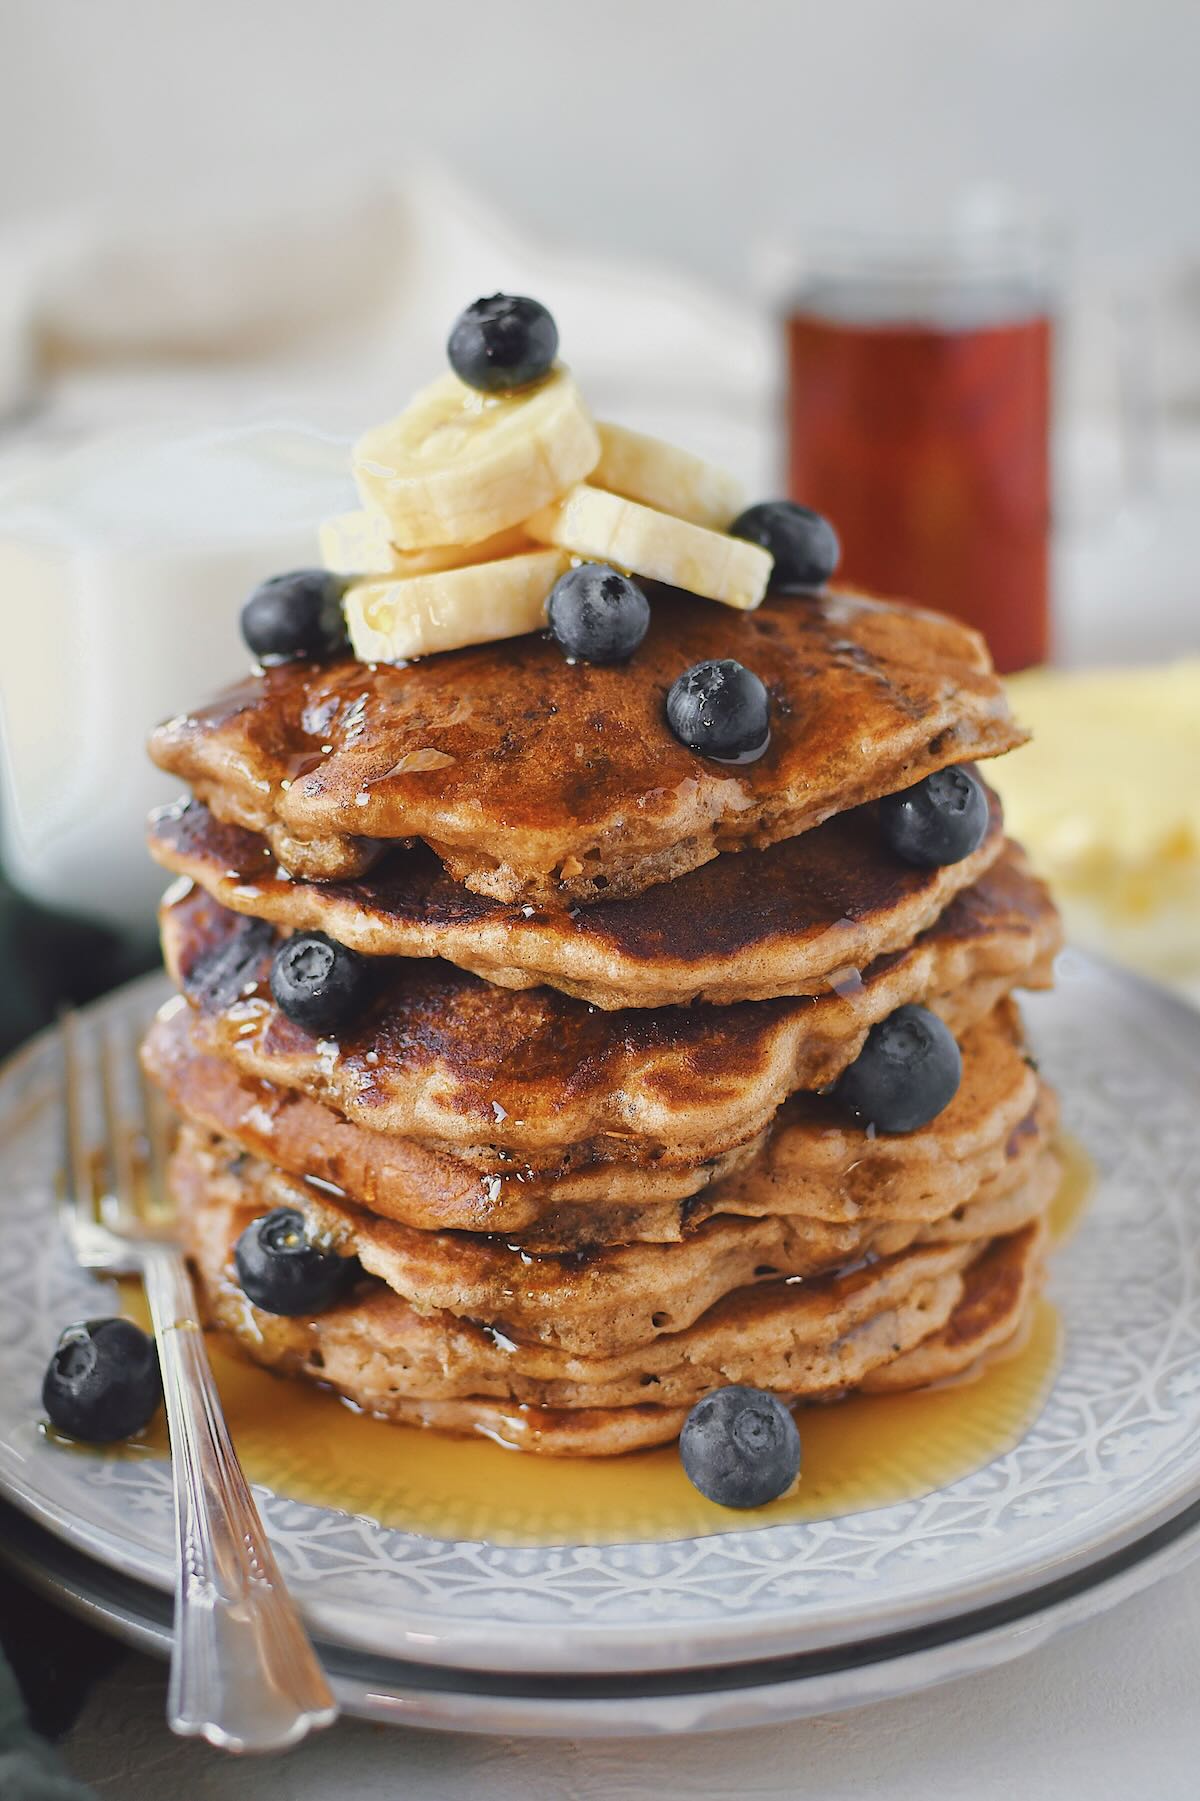 Blueberry Banana Pancakes stacked high, topped with banana slices and extra blueberries.